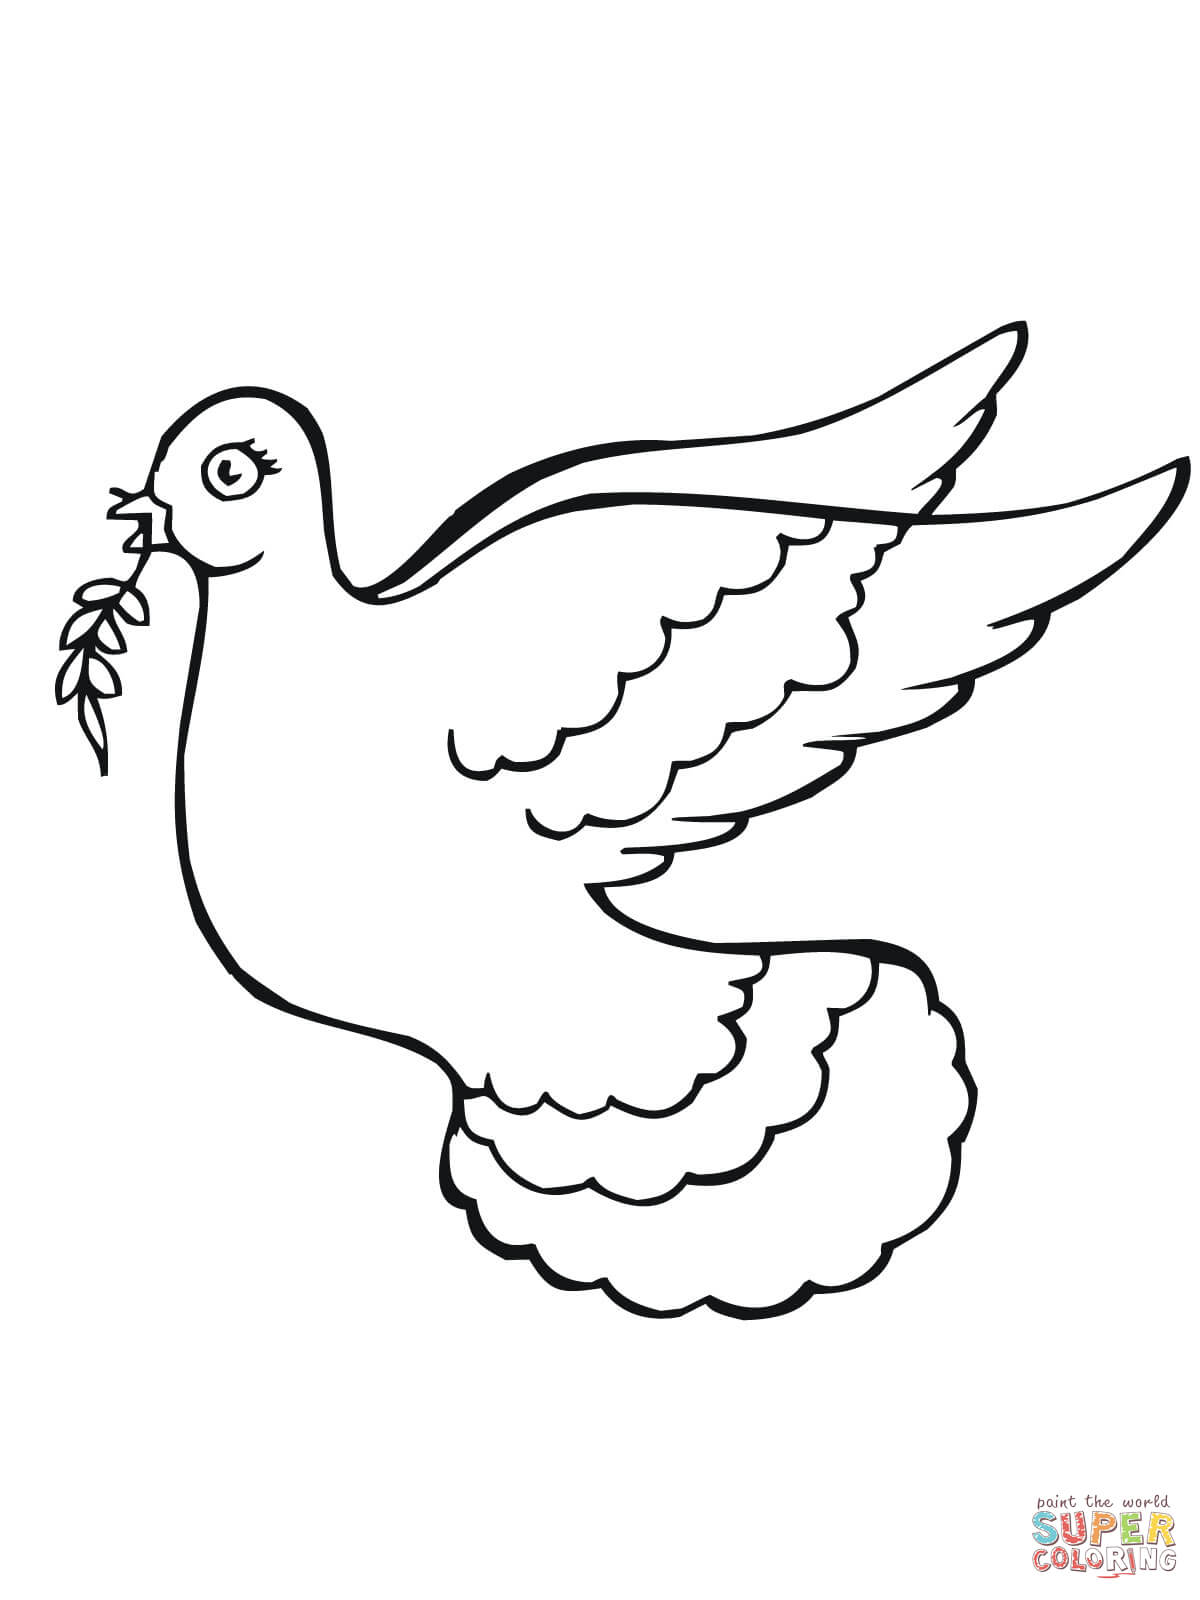 Dove Holding Olive Branch coloring page | Free Printable Coloring ...